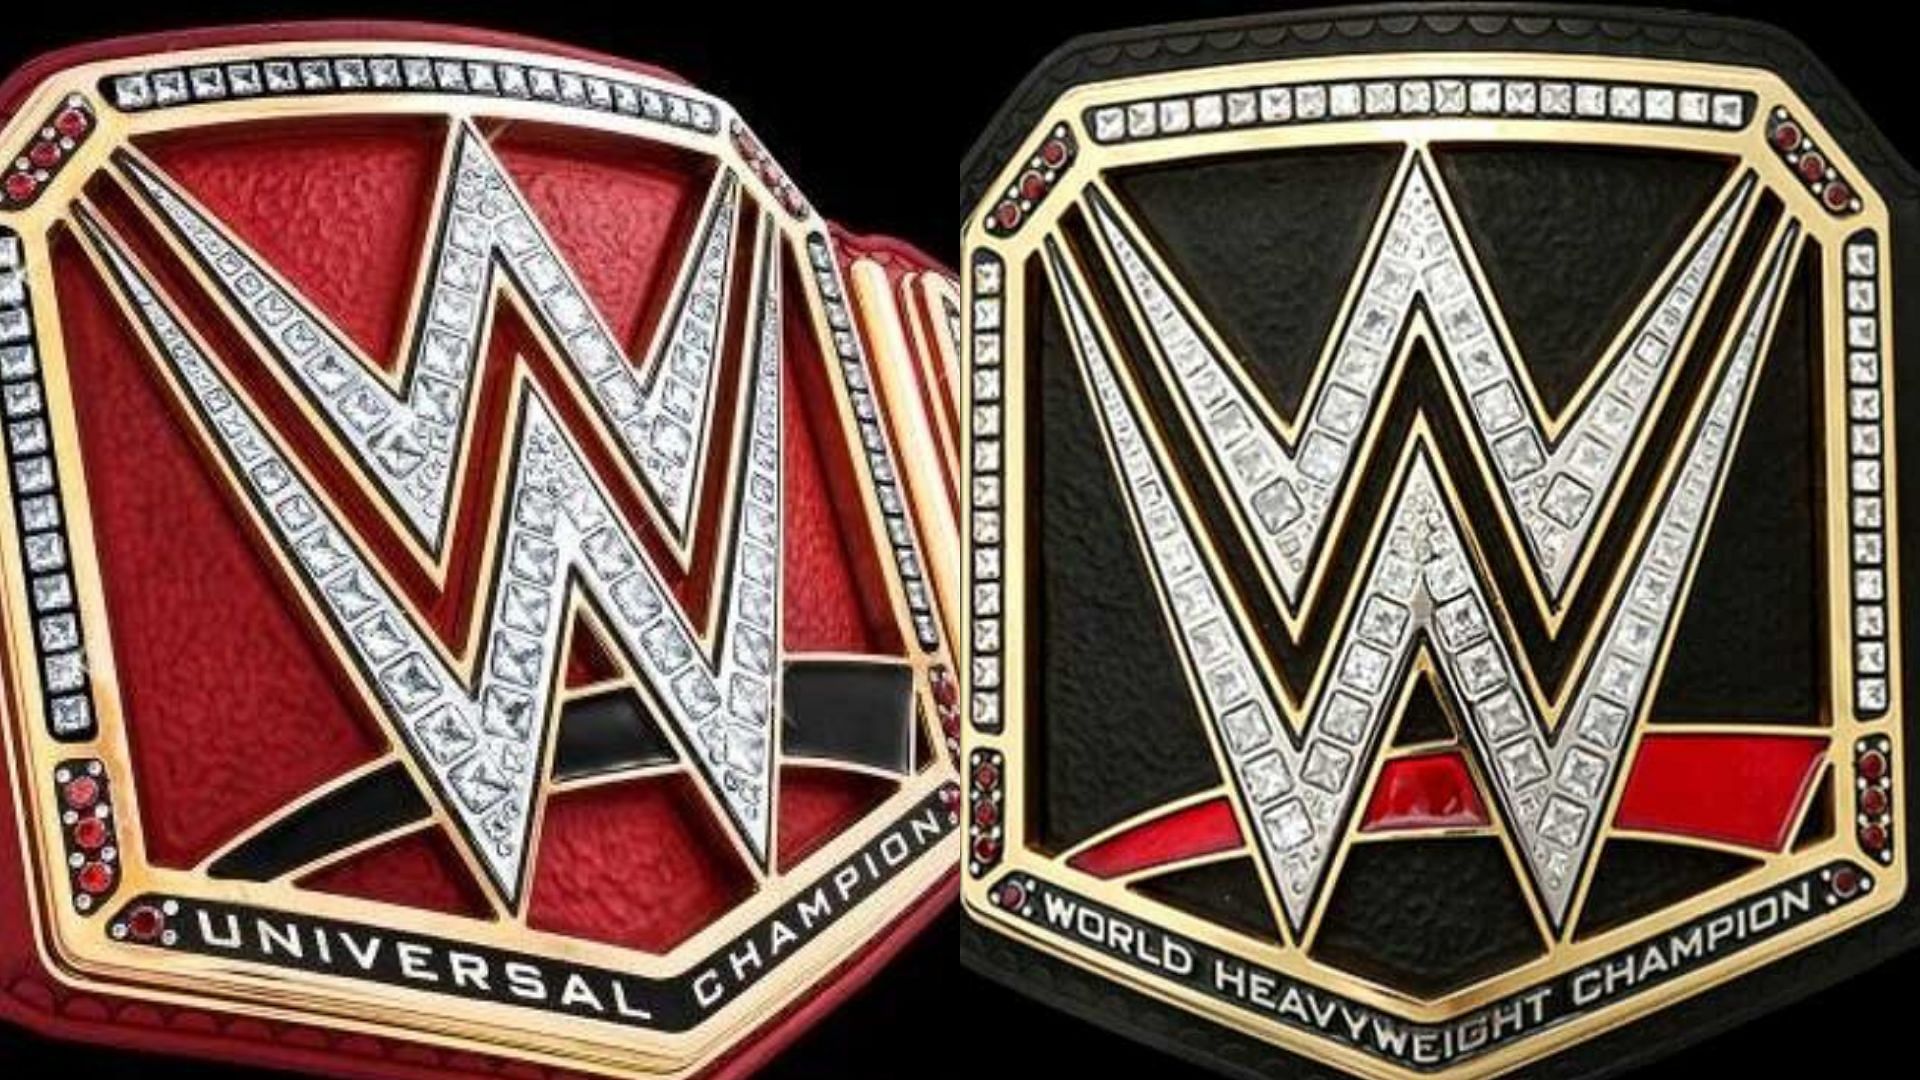 A superstar is favored to end the year as Undisputed WWE Universal Champion.